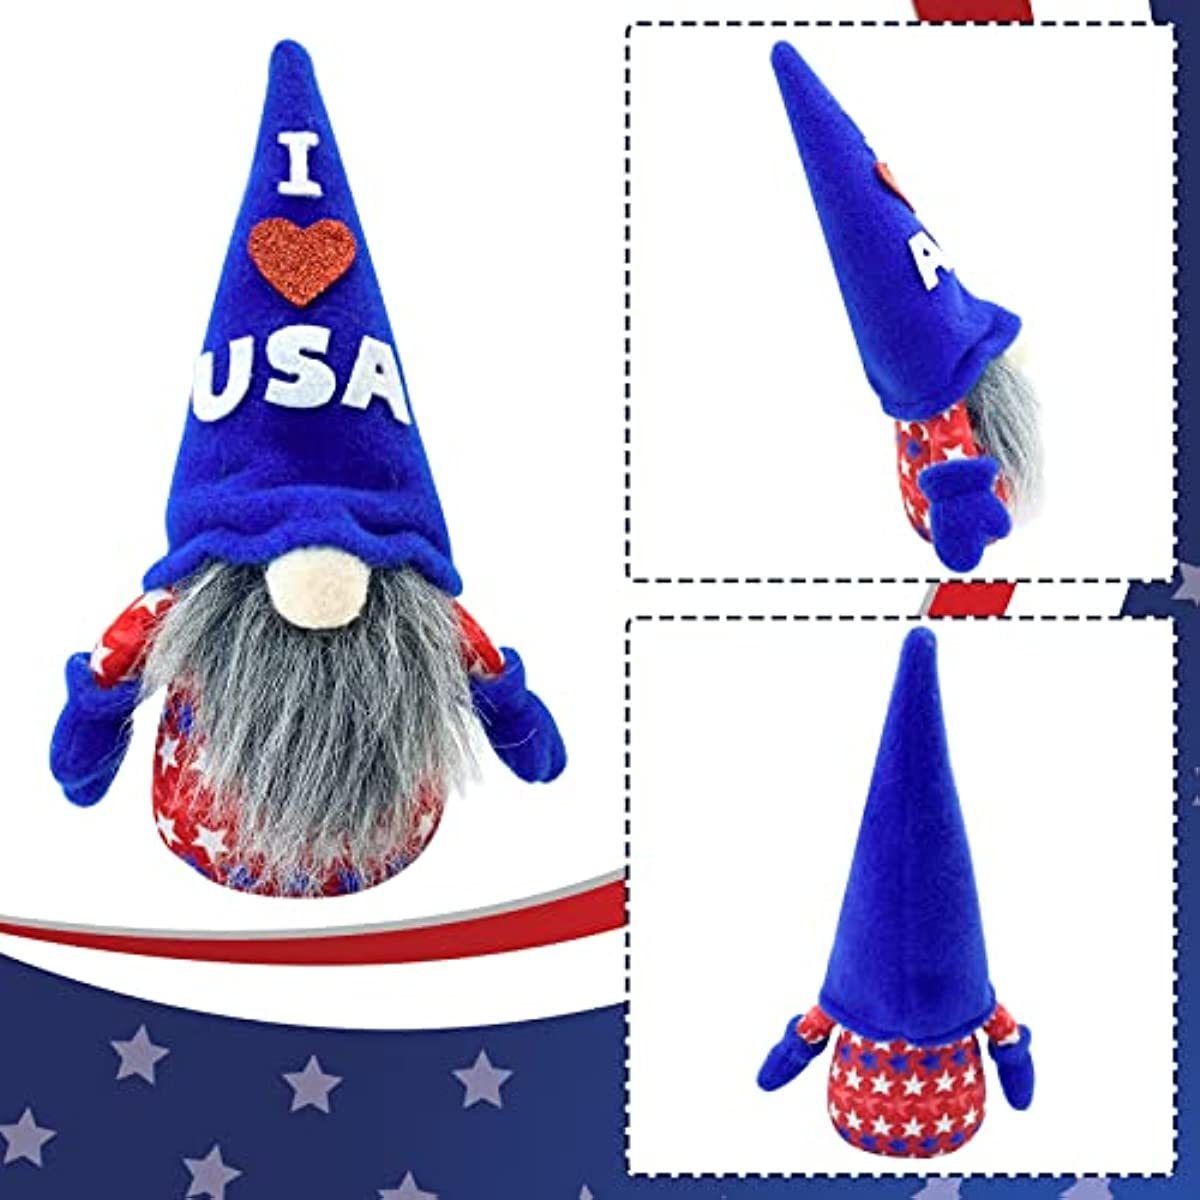 Lovinland USA American Patriotic Gnomes 4th of July American Independence Day Memorial Labor Veterans Decorations; 2 pack